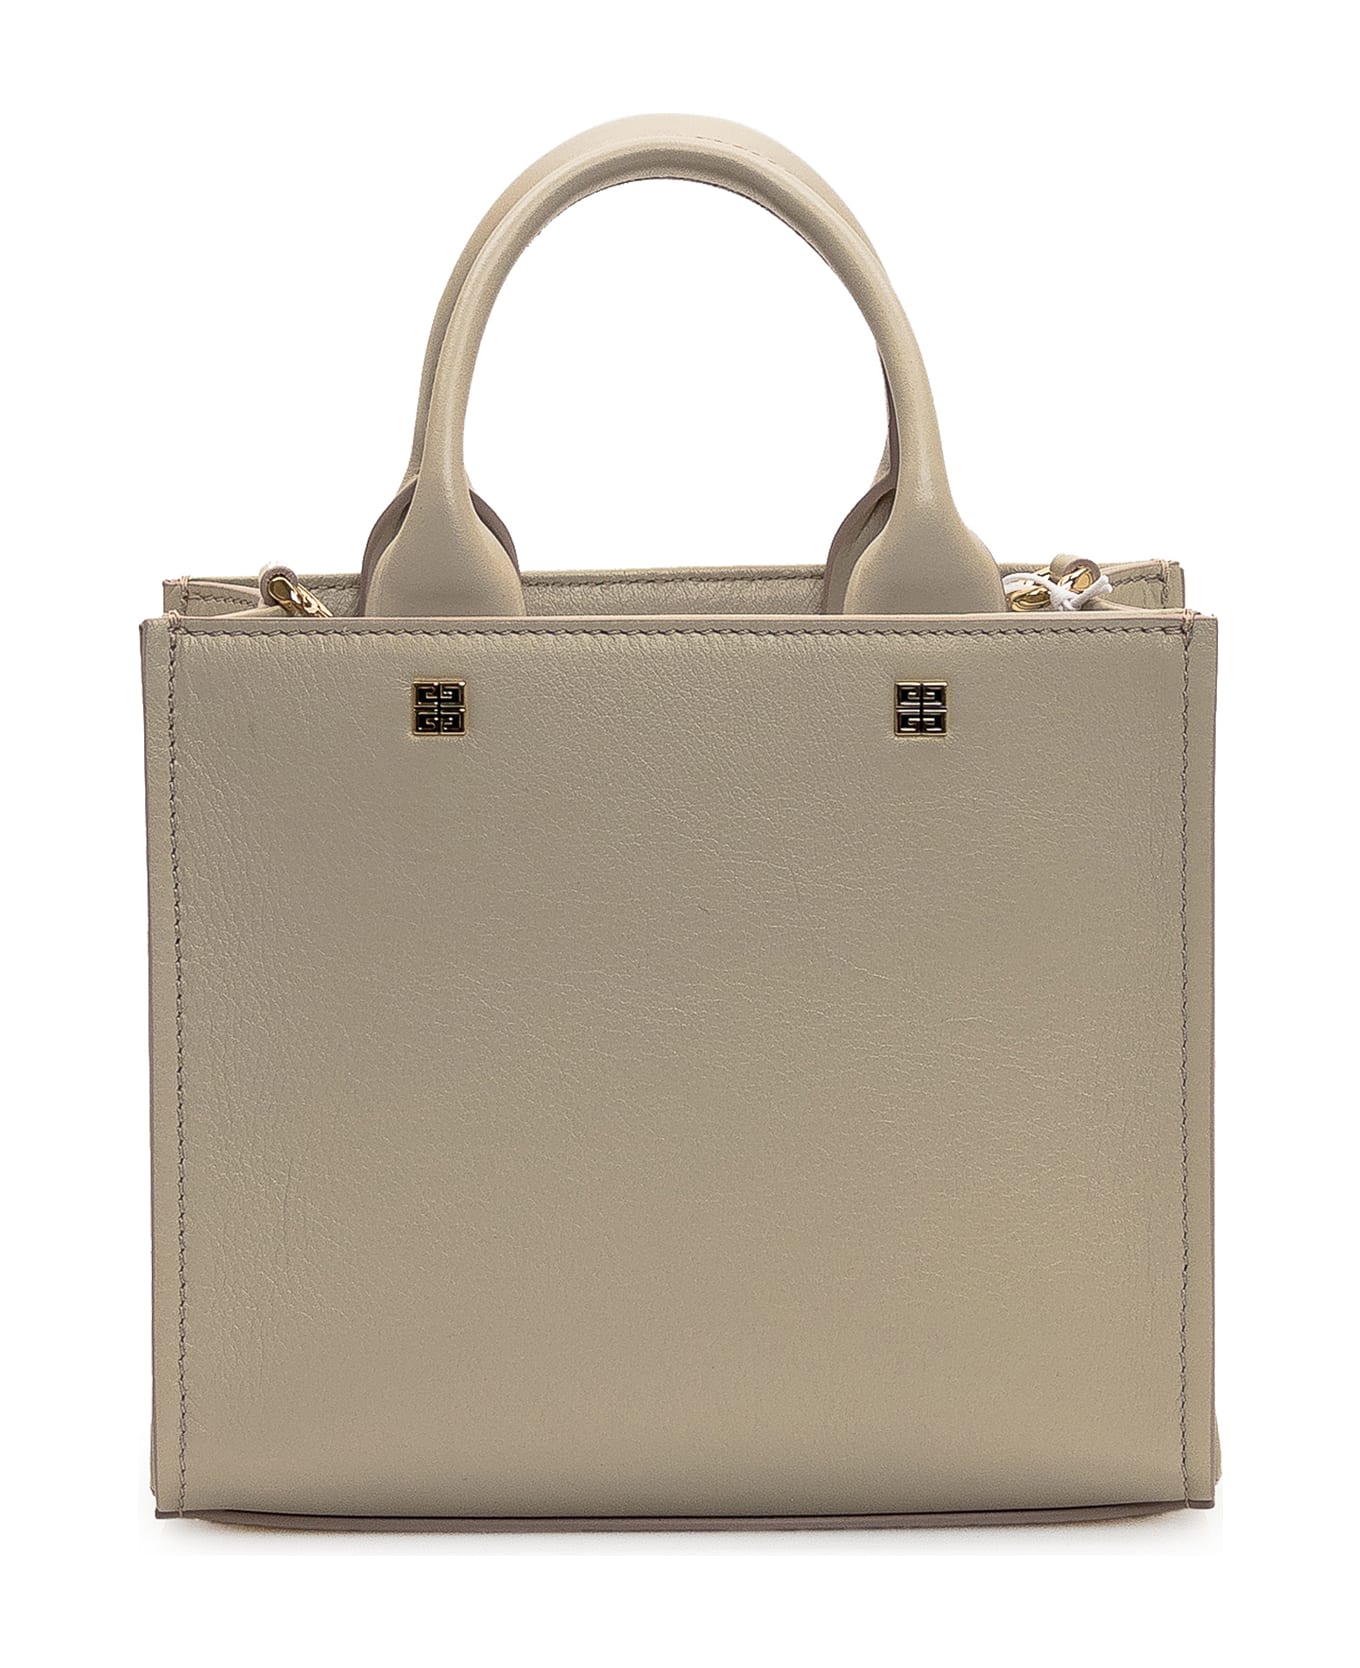 Givenchy Mini G Tote Bag - Beige トートバッグ